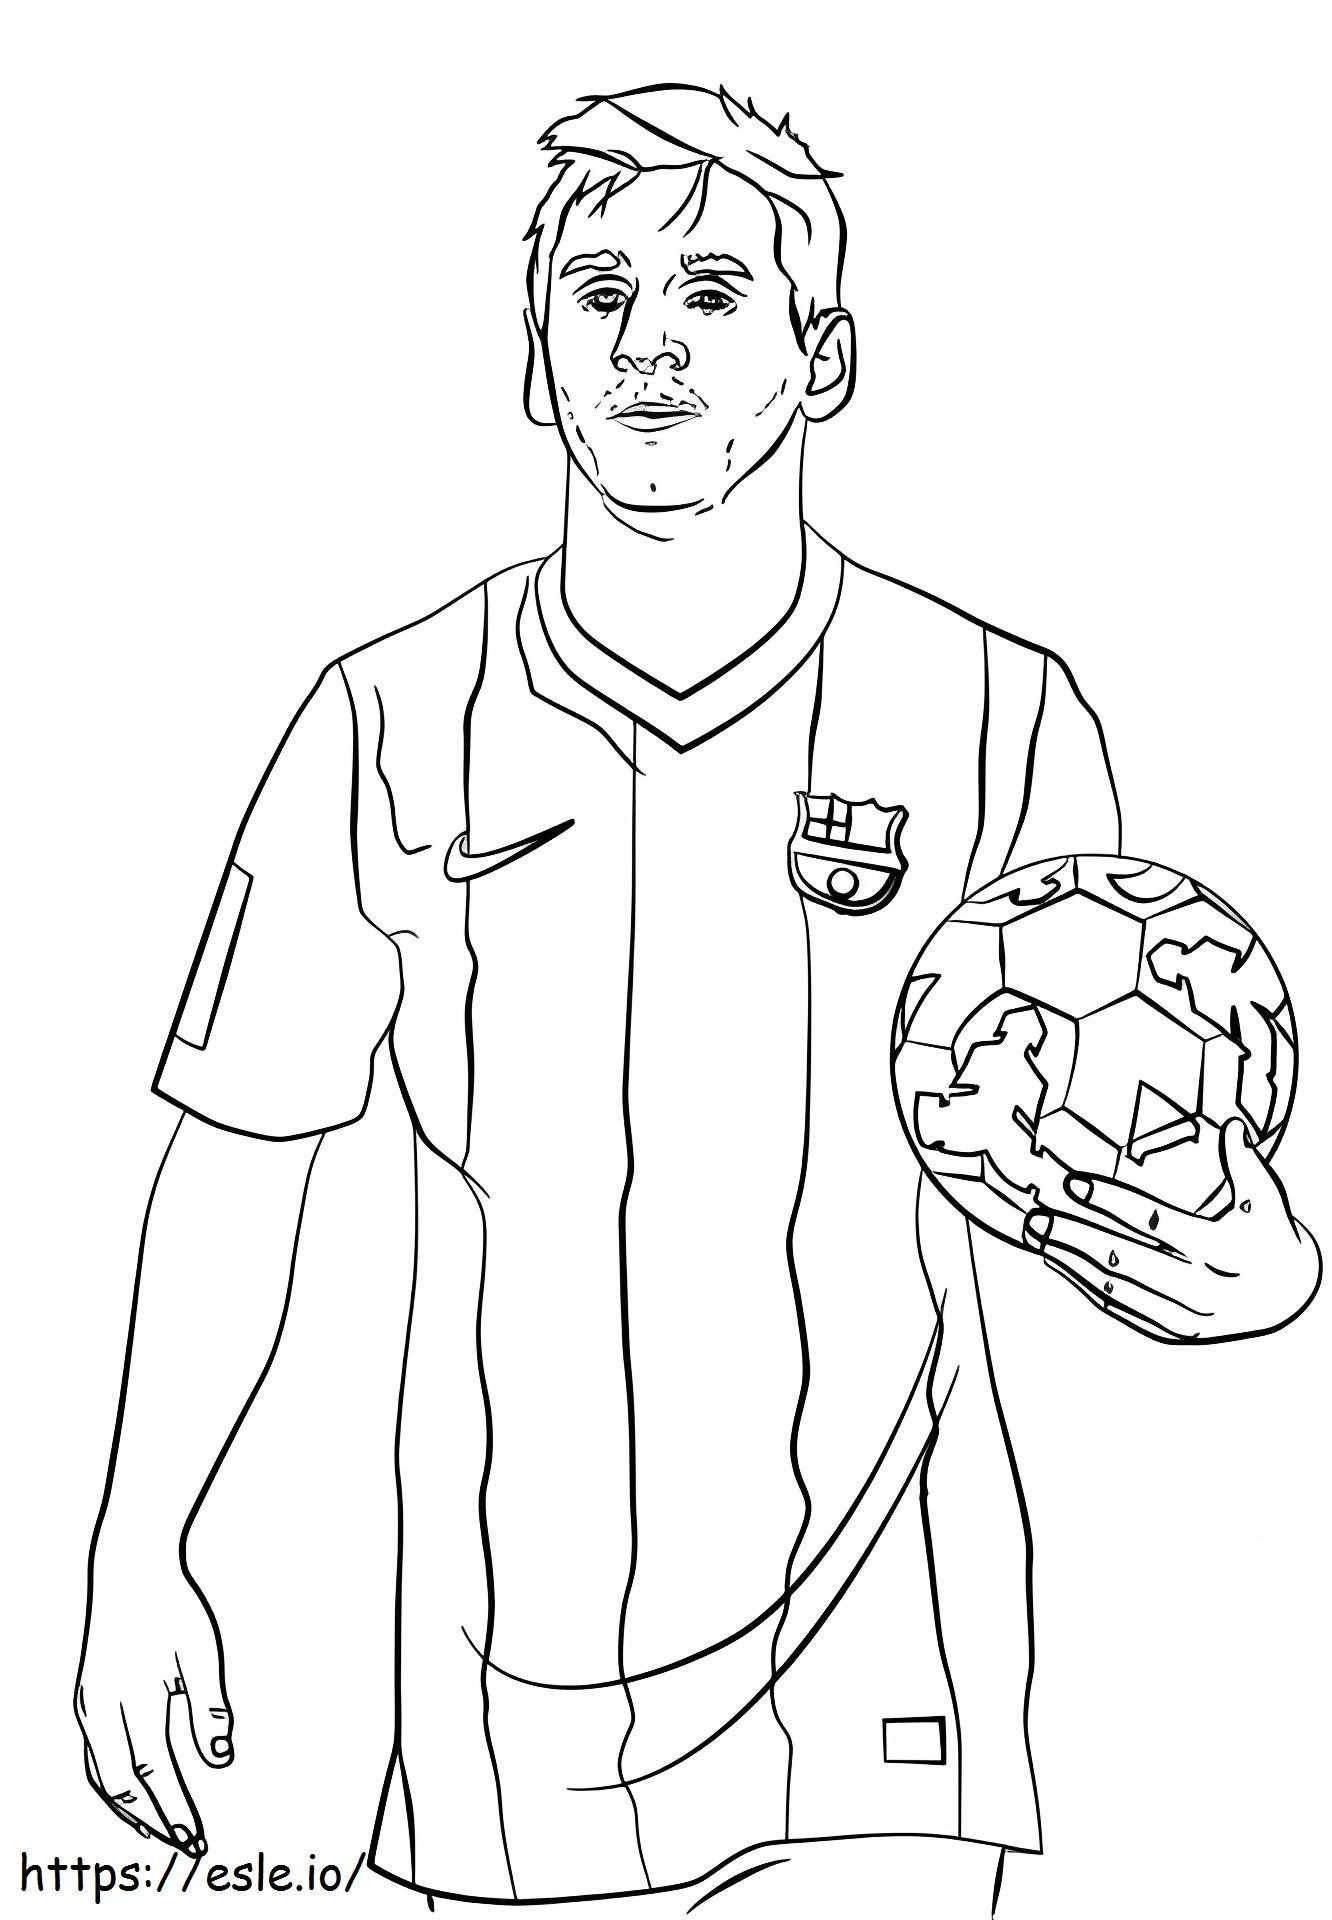 Lionel Messia4 coloring page